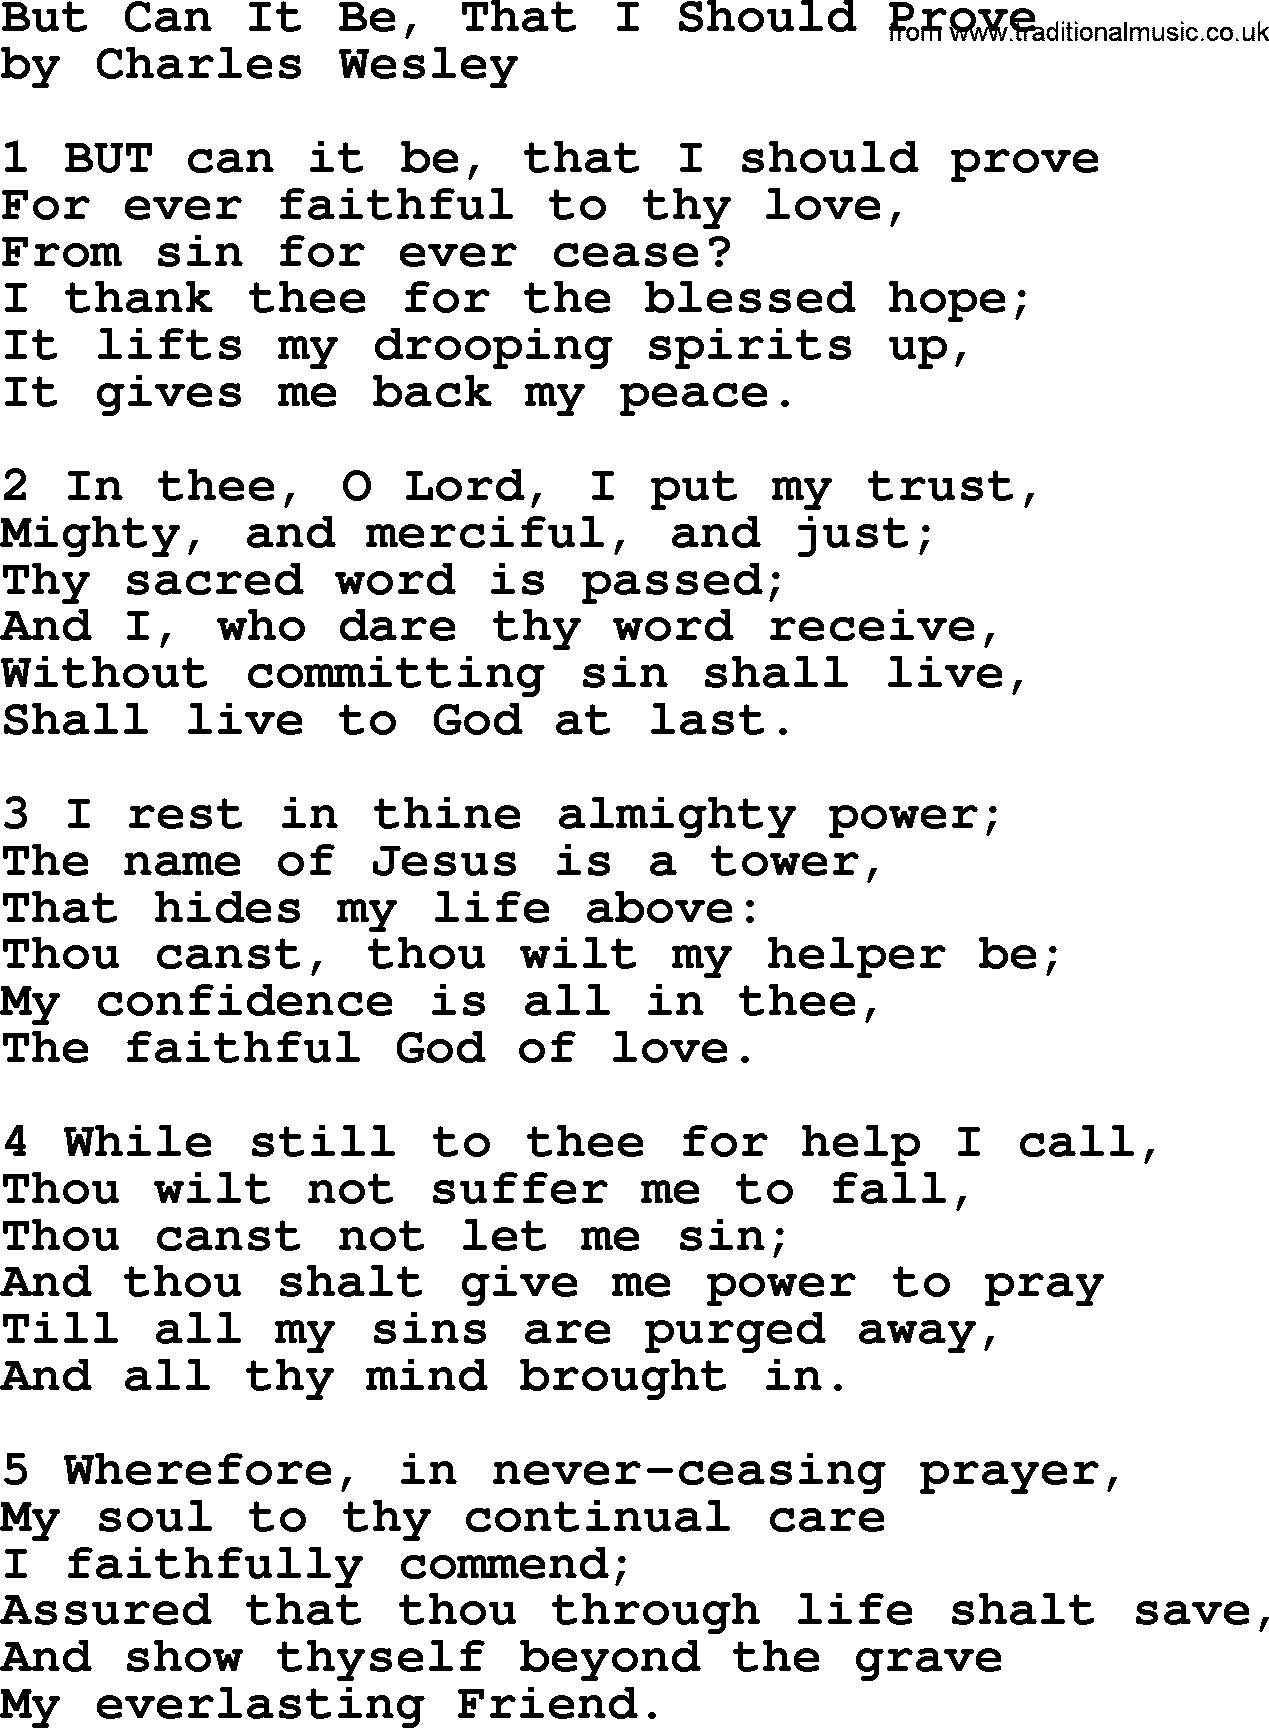 Charles Wesley hymn: But Can It Be, That I Should Prove, lyrics